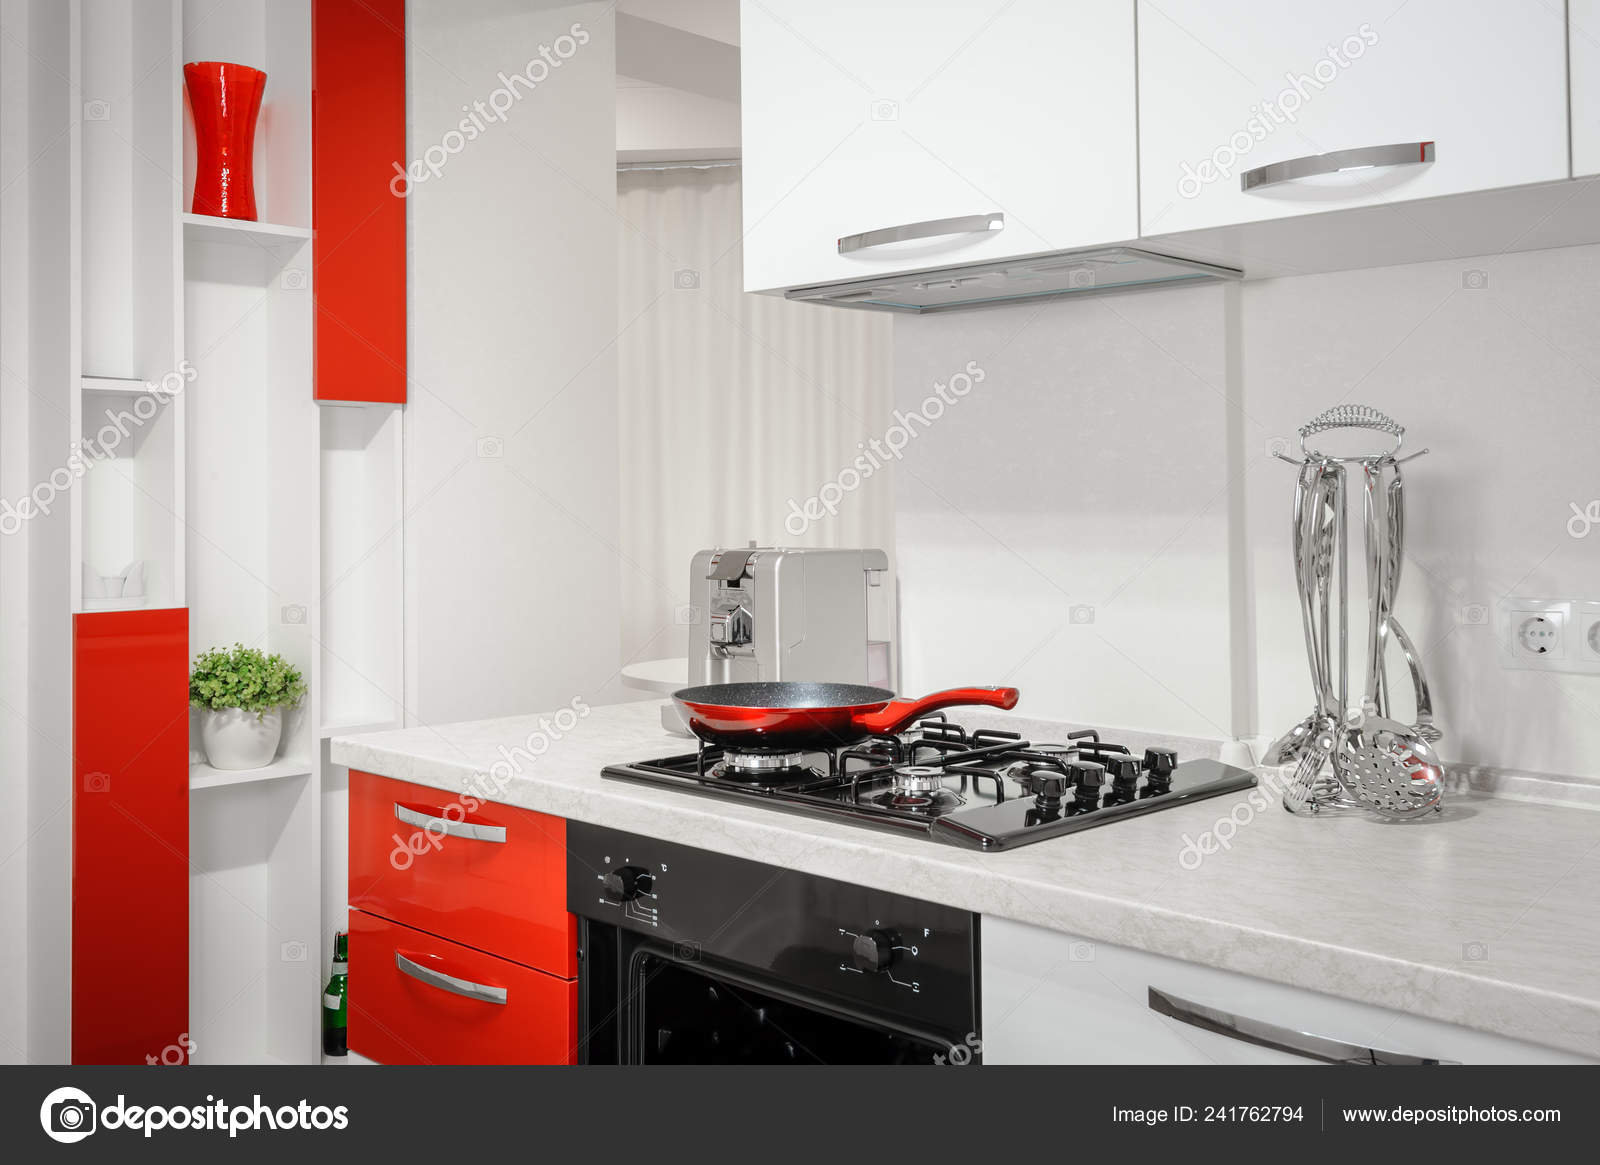 Modern Kitchen Red And White Modern Red And White Kitchen